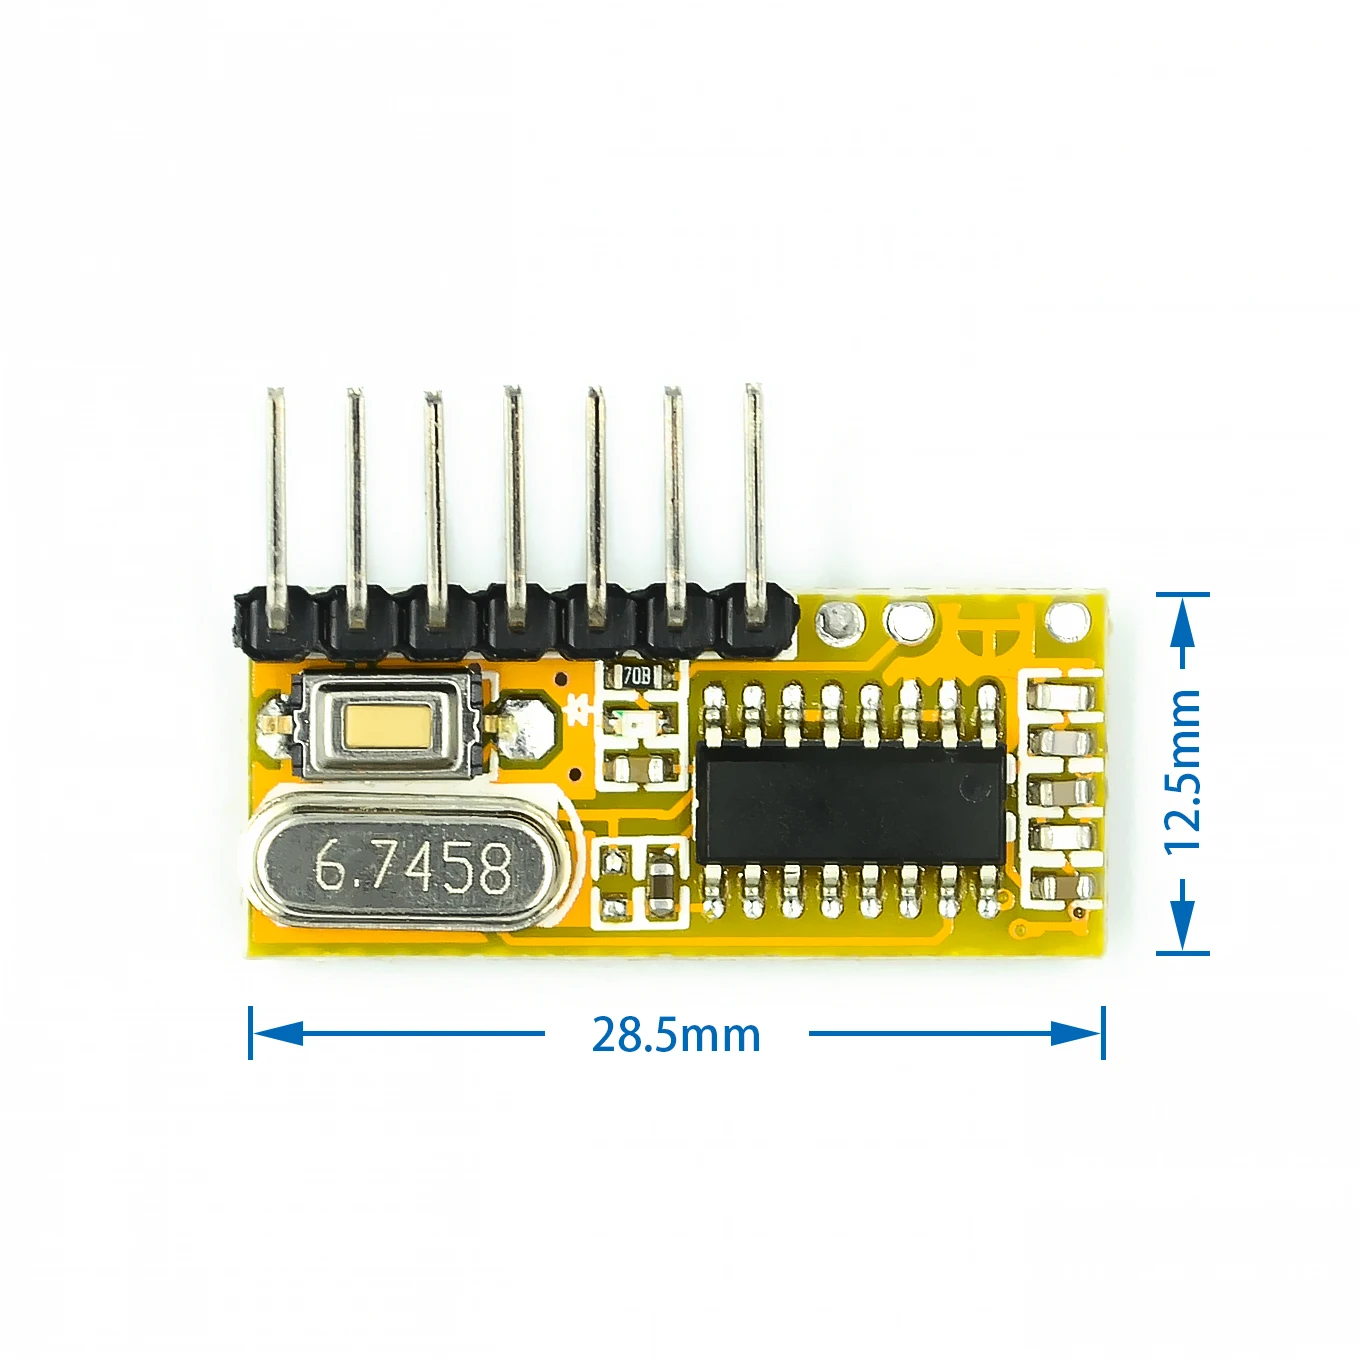 RXC6 433Mhz Superheterodyne Wireless Receiver PT2262Module With Learning Code Mode Code Steady for  /AVR